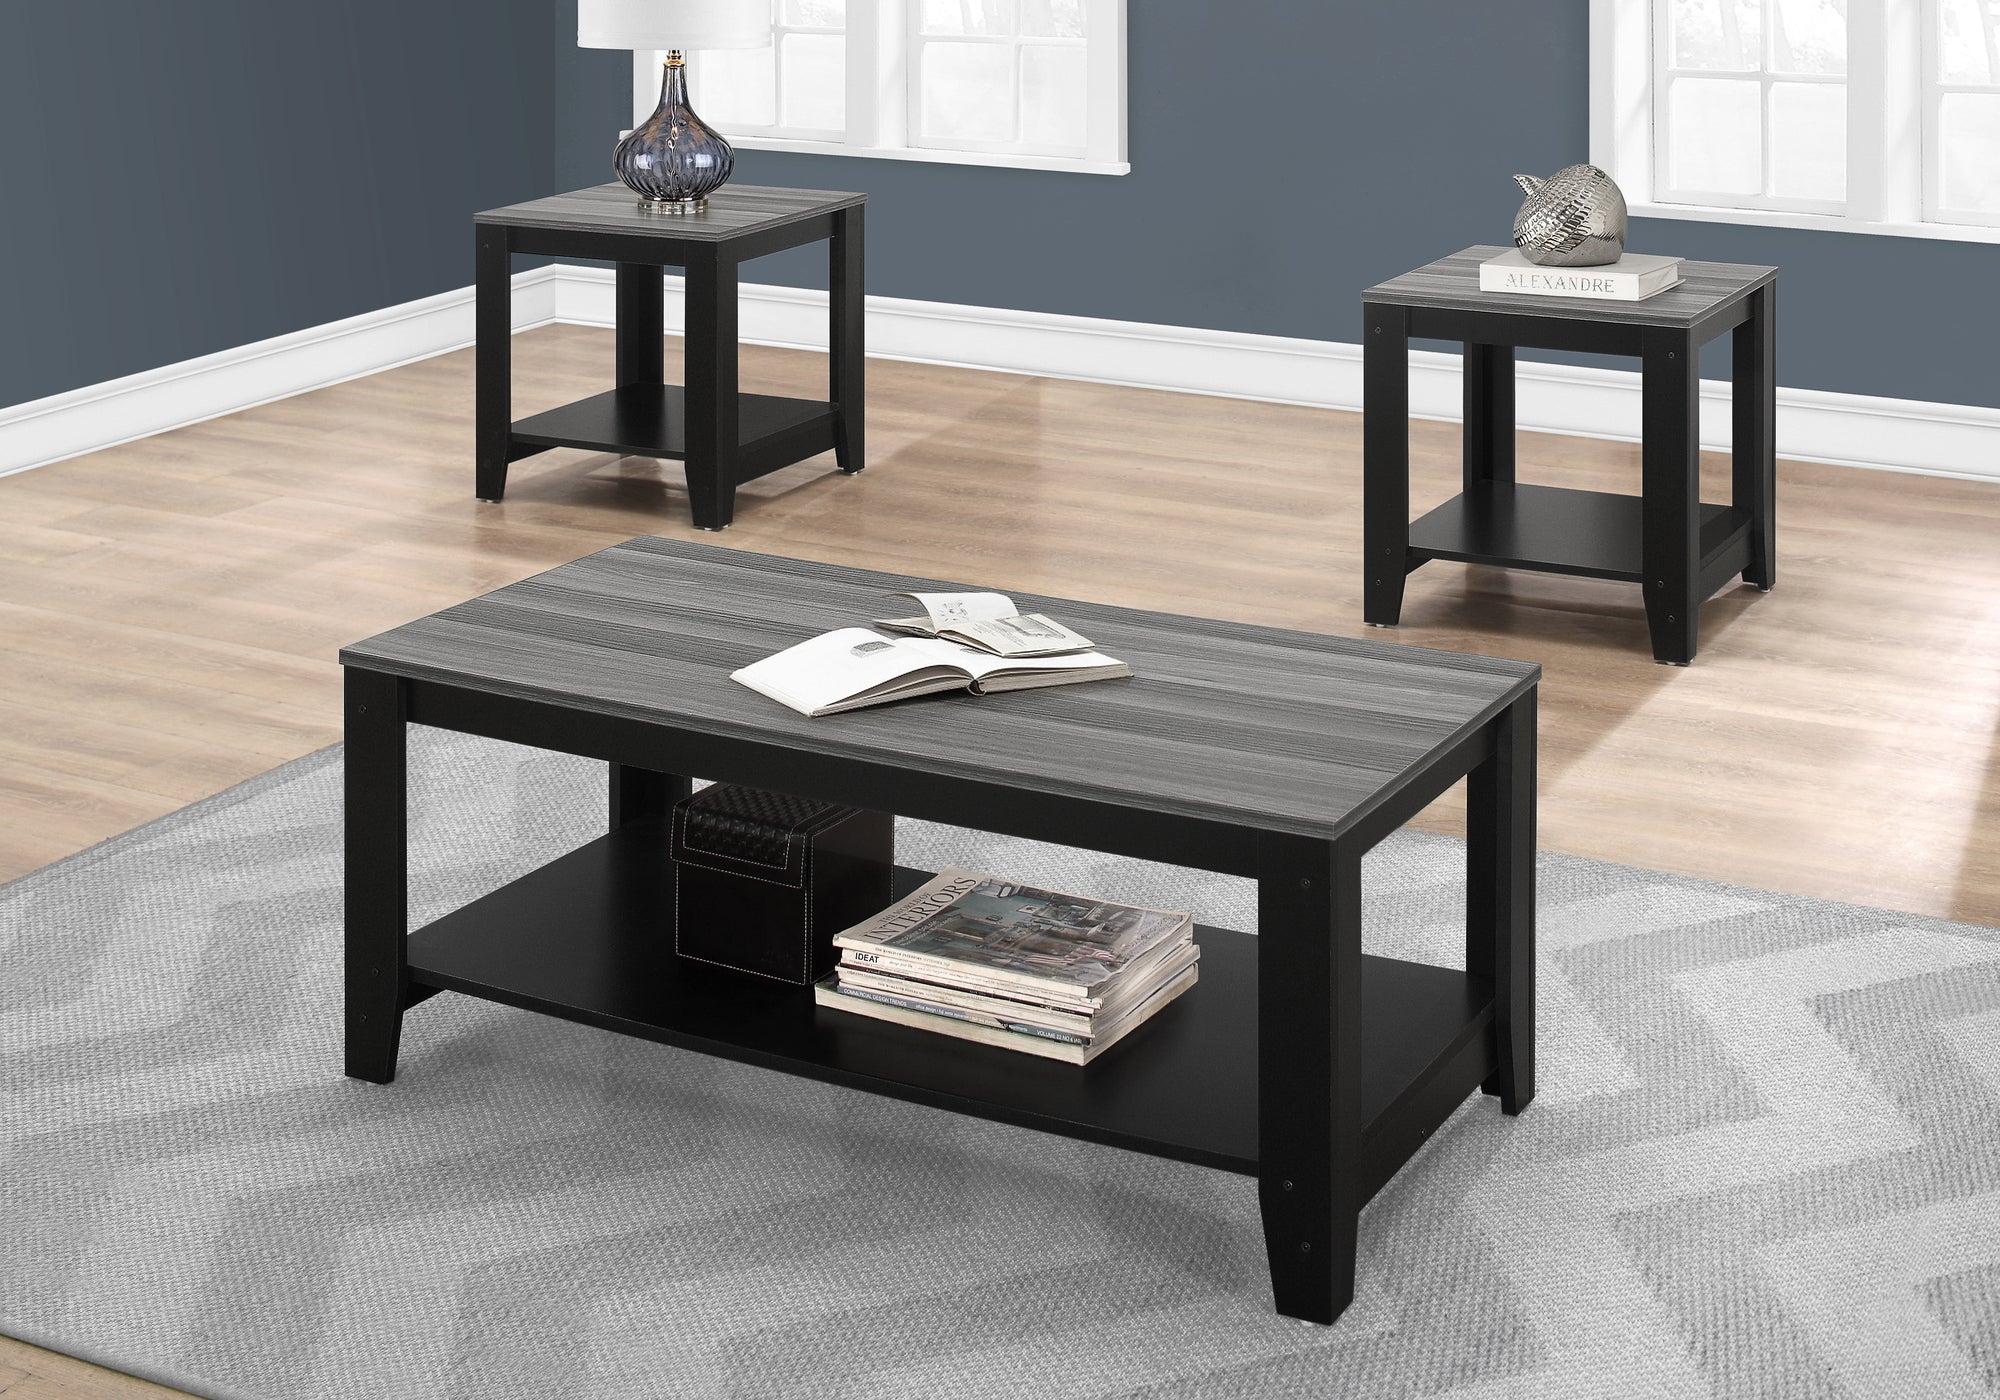 MN-897992P    Table Set, 3Pcs Set, Coffee, End, Side, Accent, Living Room, Laminate, Black, Grey, Contemporary, Modern